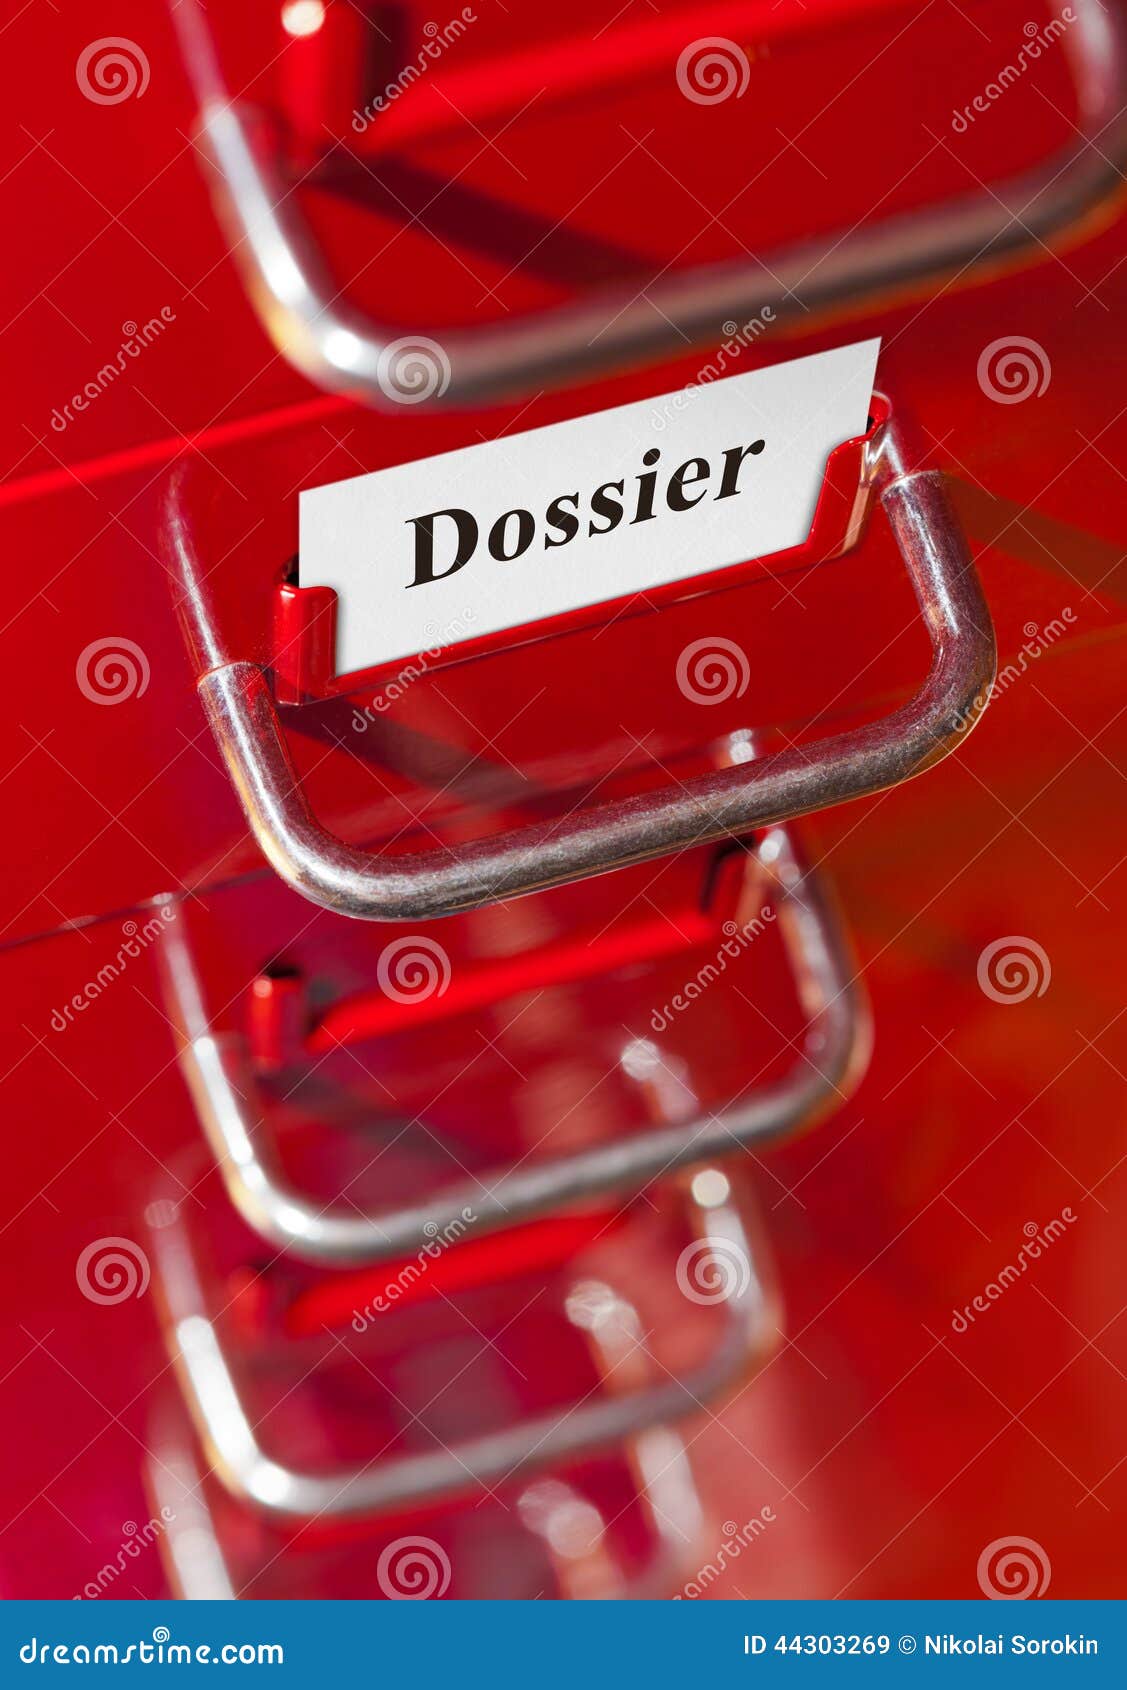 Red File Cabinet With Card Dossier Stock Image Image Of Folder